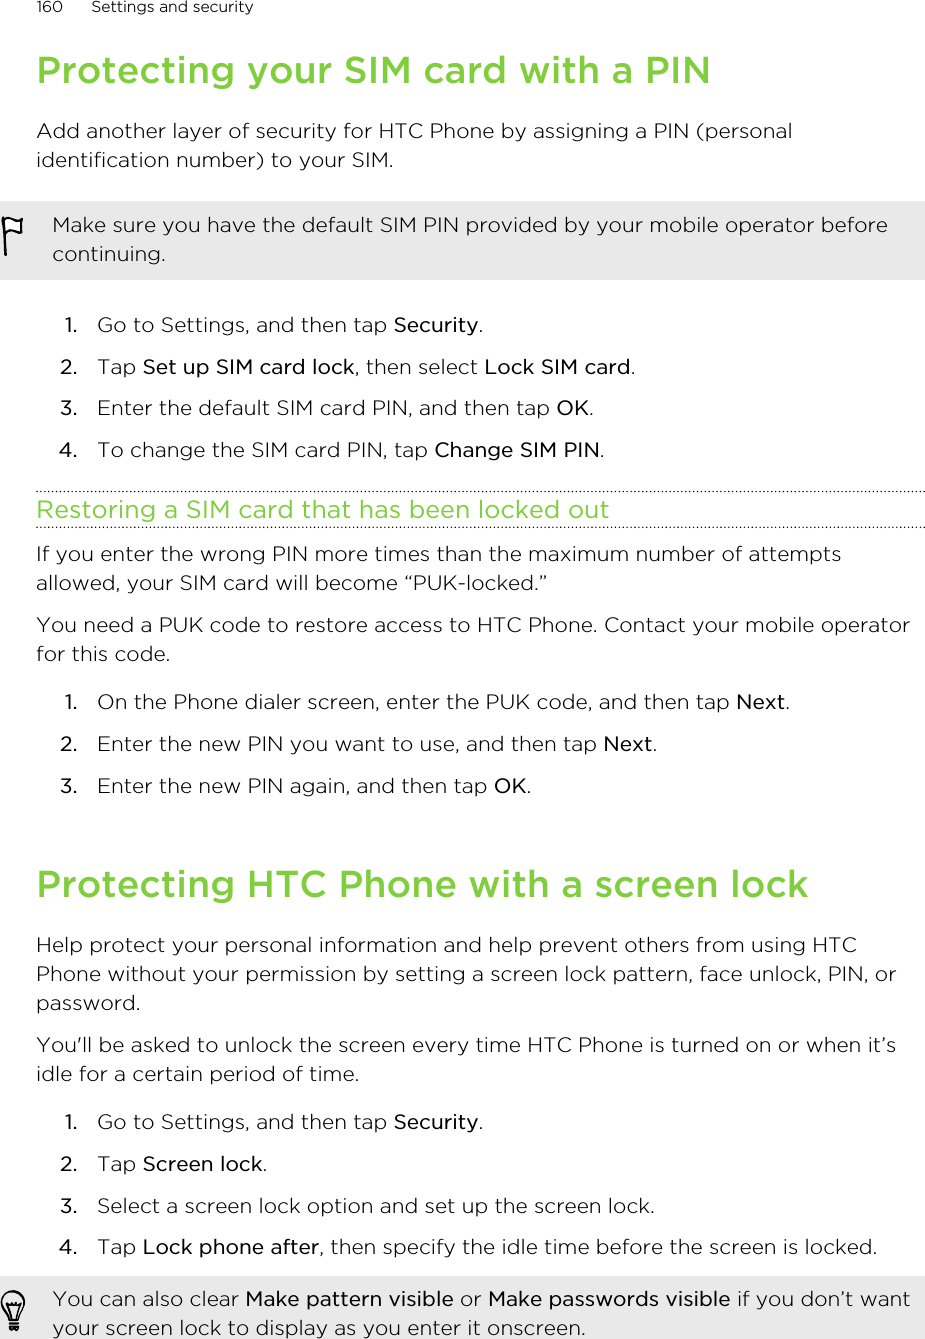 Protecting your SIM card with a PINAdd another layer of security for HTC Phone by assigning a PIN (personalidentification number) to your SIM.Make sure you have the default SIM PIN provided by your mobile operator beforecontinuing.1. Go to Settings, and then tap Security.2. Tap Set up SIM card lock, then select Lock SIM card.3. Enter the default SIM card PIN, and then tap OK.4. To change the SIM card PIN, tap Change SIM PIN.Restoring a SIM card that has been locked outIf you enter the wrong PIN more times than the maximum number of attemptsallowed, your SIM card will become “PUK-locked.”You need a PUK code to restore access to HTC Phone. Contact your mobile operatorfor this code.1. On the Phone dialer screen, enter the PUK code, and then tap Next.2. Enter the new PIN you want to use, and then tap Next.3. Enter the new PIN again, and then tap OK.Protecting HTC Phone with a screen lockHelp protect your personal information and help prevent others from using HTCPhone without your permission by setting a screen lock pattern, face unlock, PIN, orpassword.You&apos;ll be asked to unlock the screen every time HTC Phone is turned on or when it’sidle for a certain period of time.1. Go to Settings, and then tap Security.2. Tap Screen lock.3. Select a screen lock option and set up the screen lock.4. Tap Lock phone after, then specify the idle time before the screen is locked. You can also clear Make pattern visible or Make passwords visible if you don’t wantyour screen lock to display as you enter it onscreen.160 Settings and securityHTC Confidential for Certification HTC Confidential for Certification